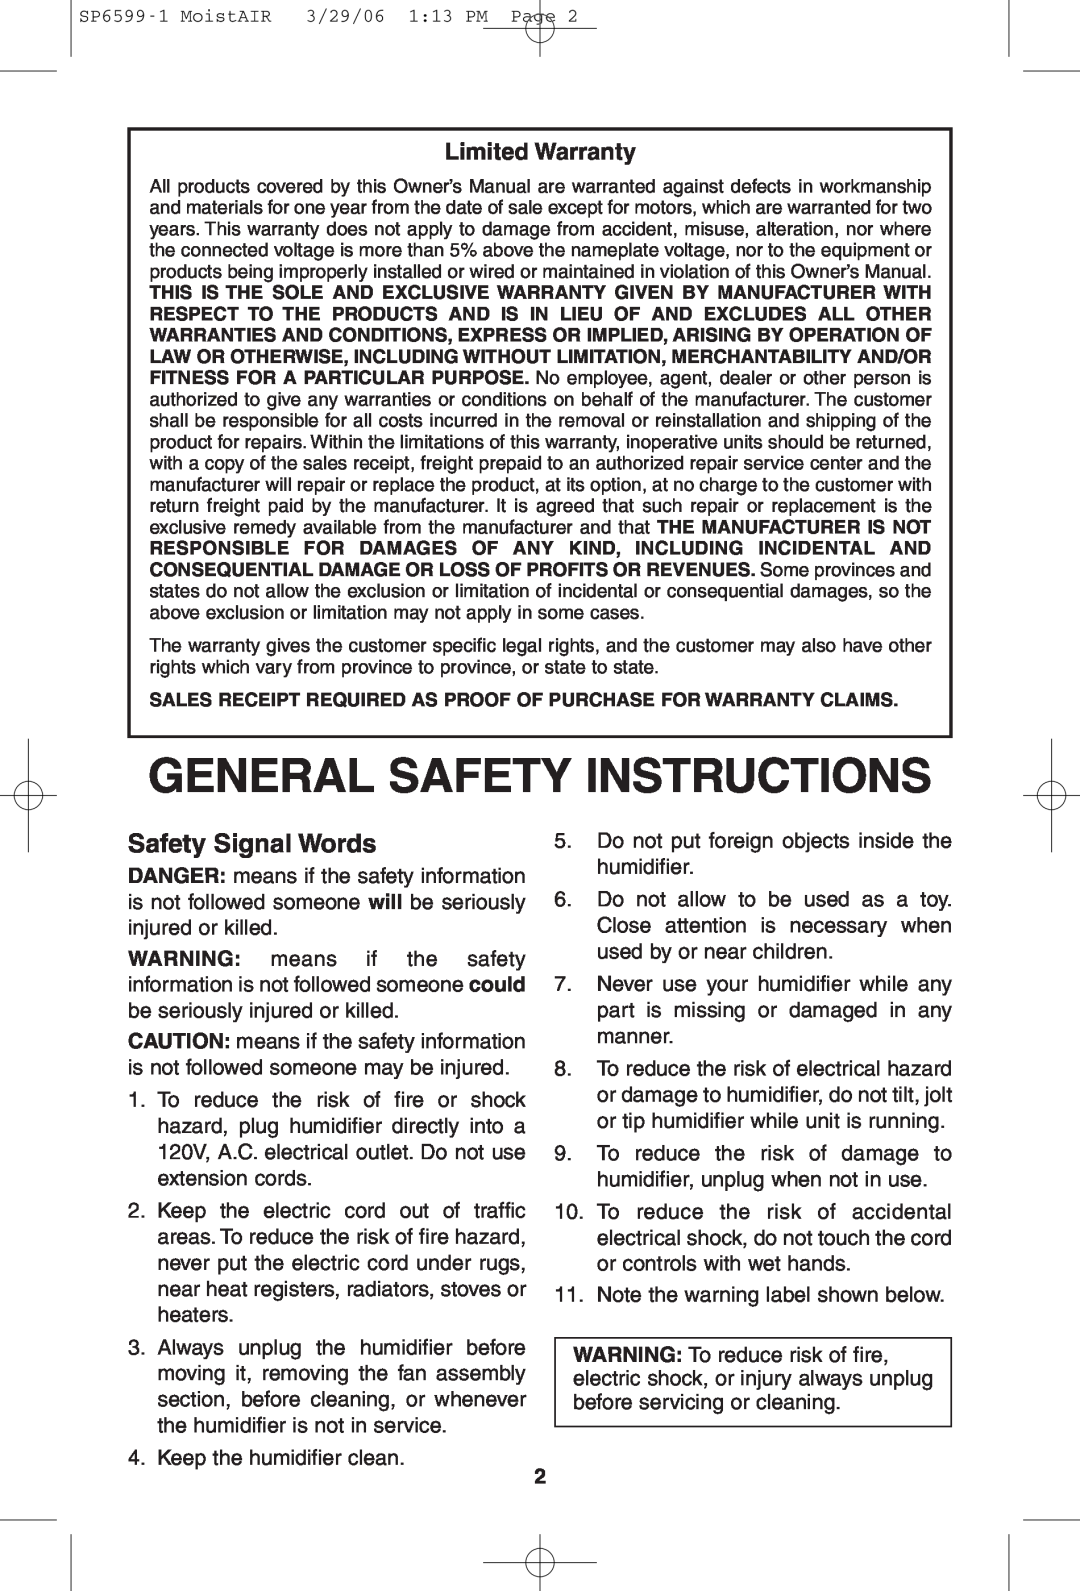 MoistAir MA 0800 0 owner manual Safety Signal Words, Limited Warranty, General Safety Instructions 